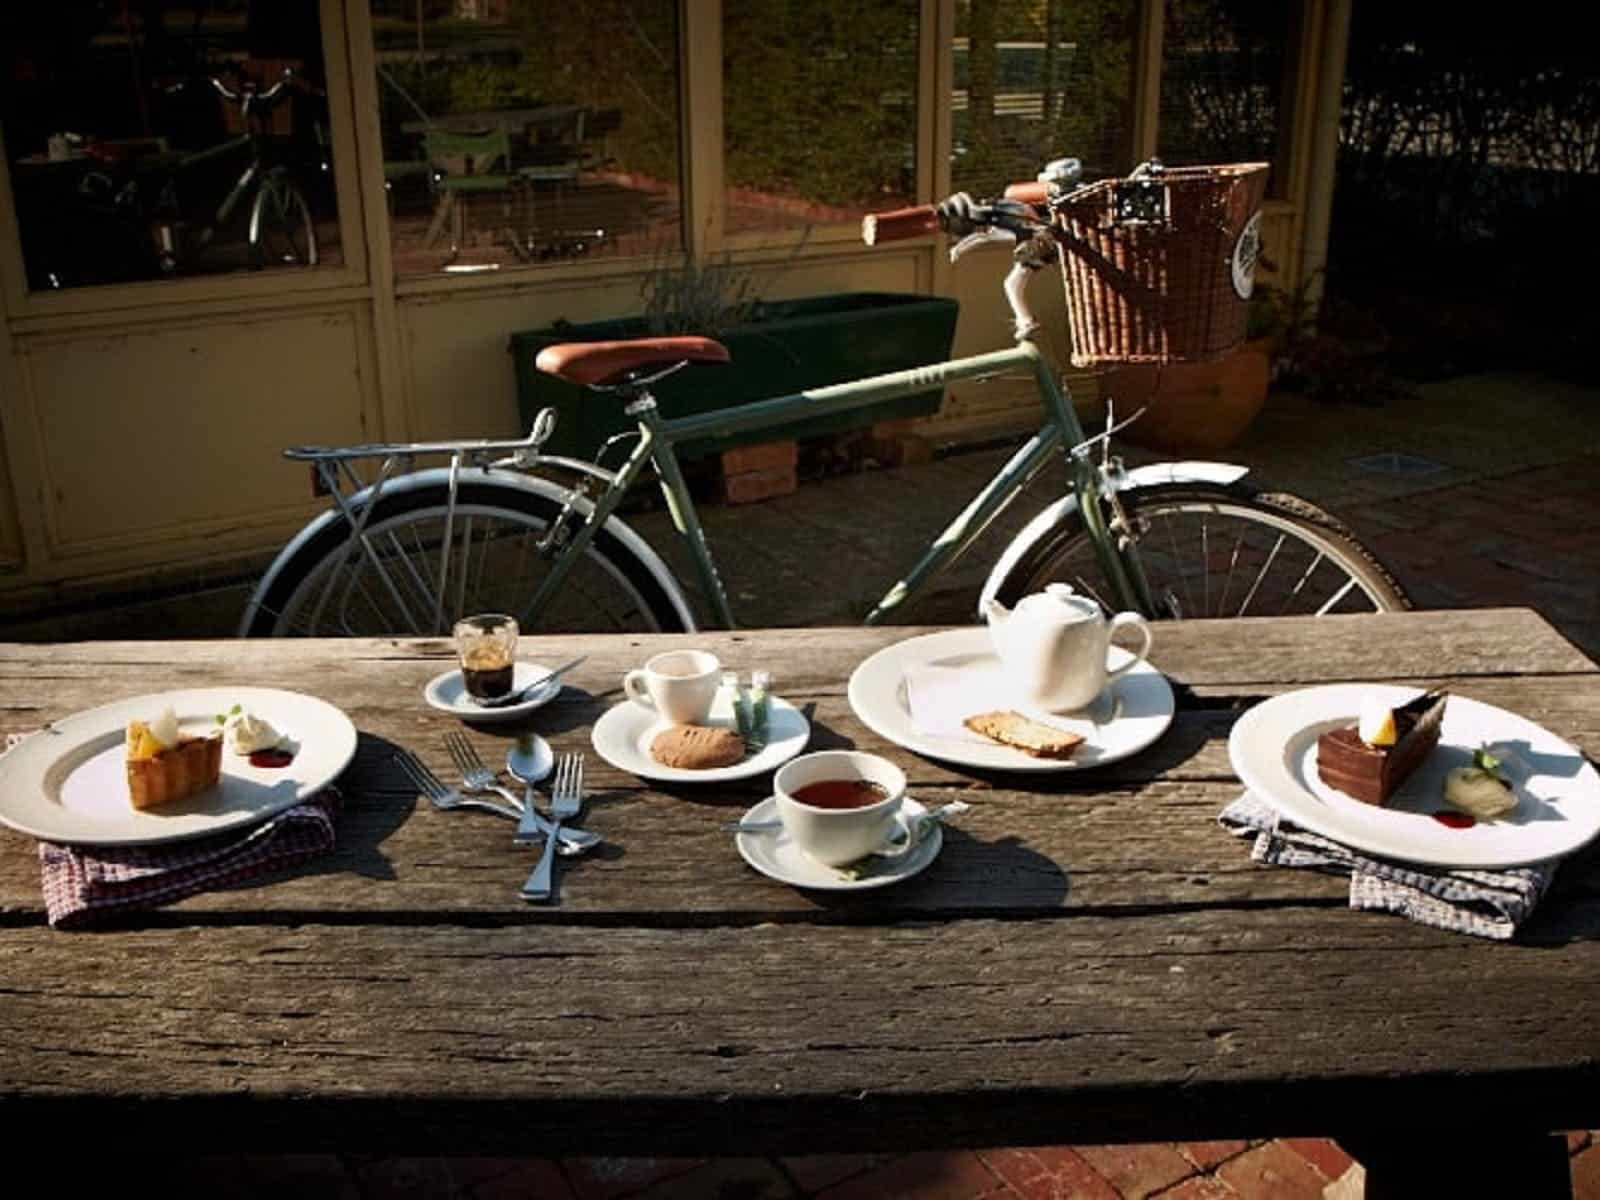 Bakery, food, and a Bike at Oxley.